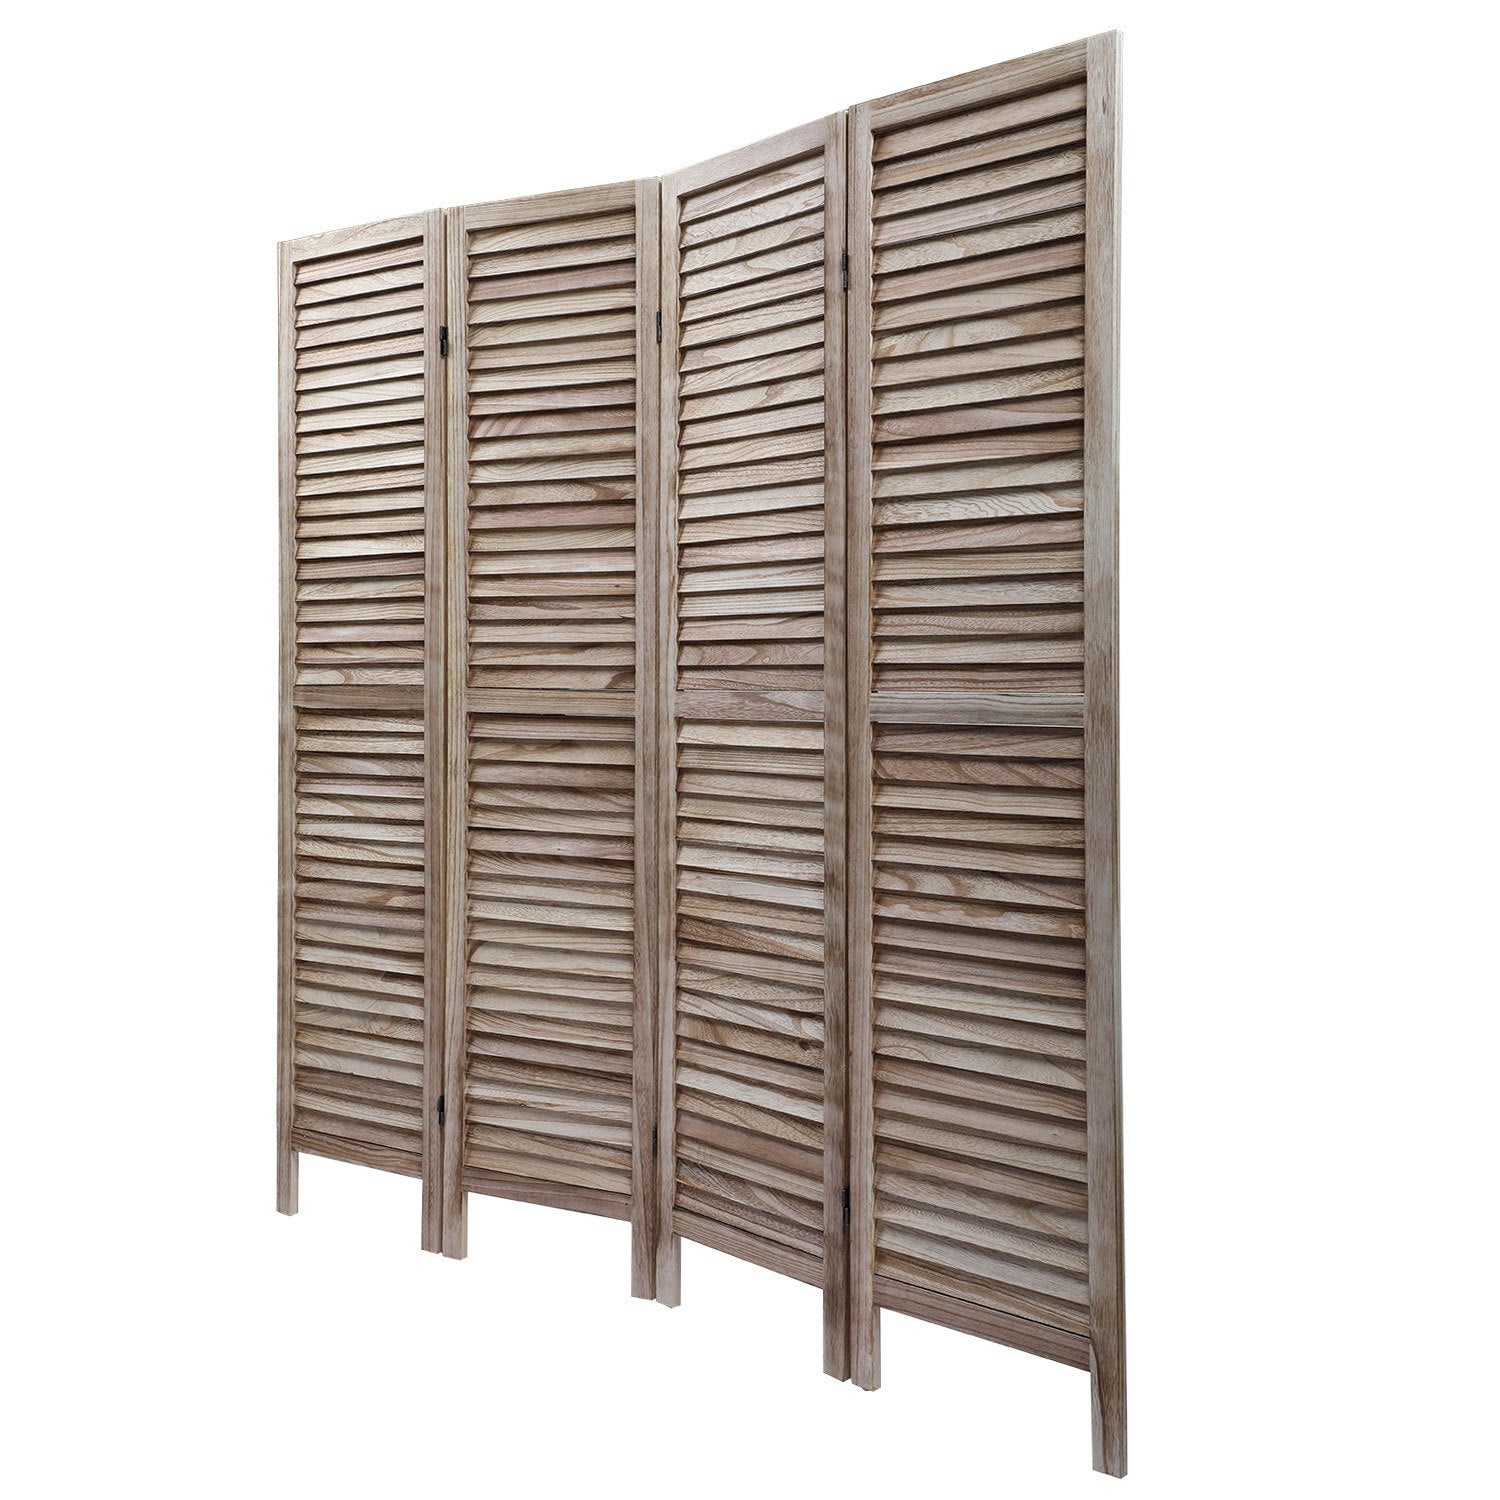  Sycamore Wood 4 Panel Room Divider